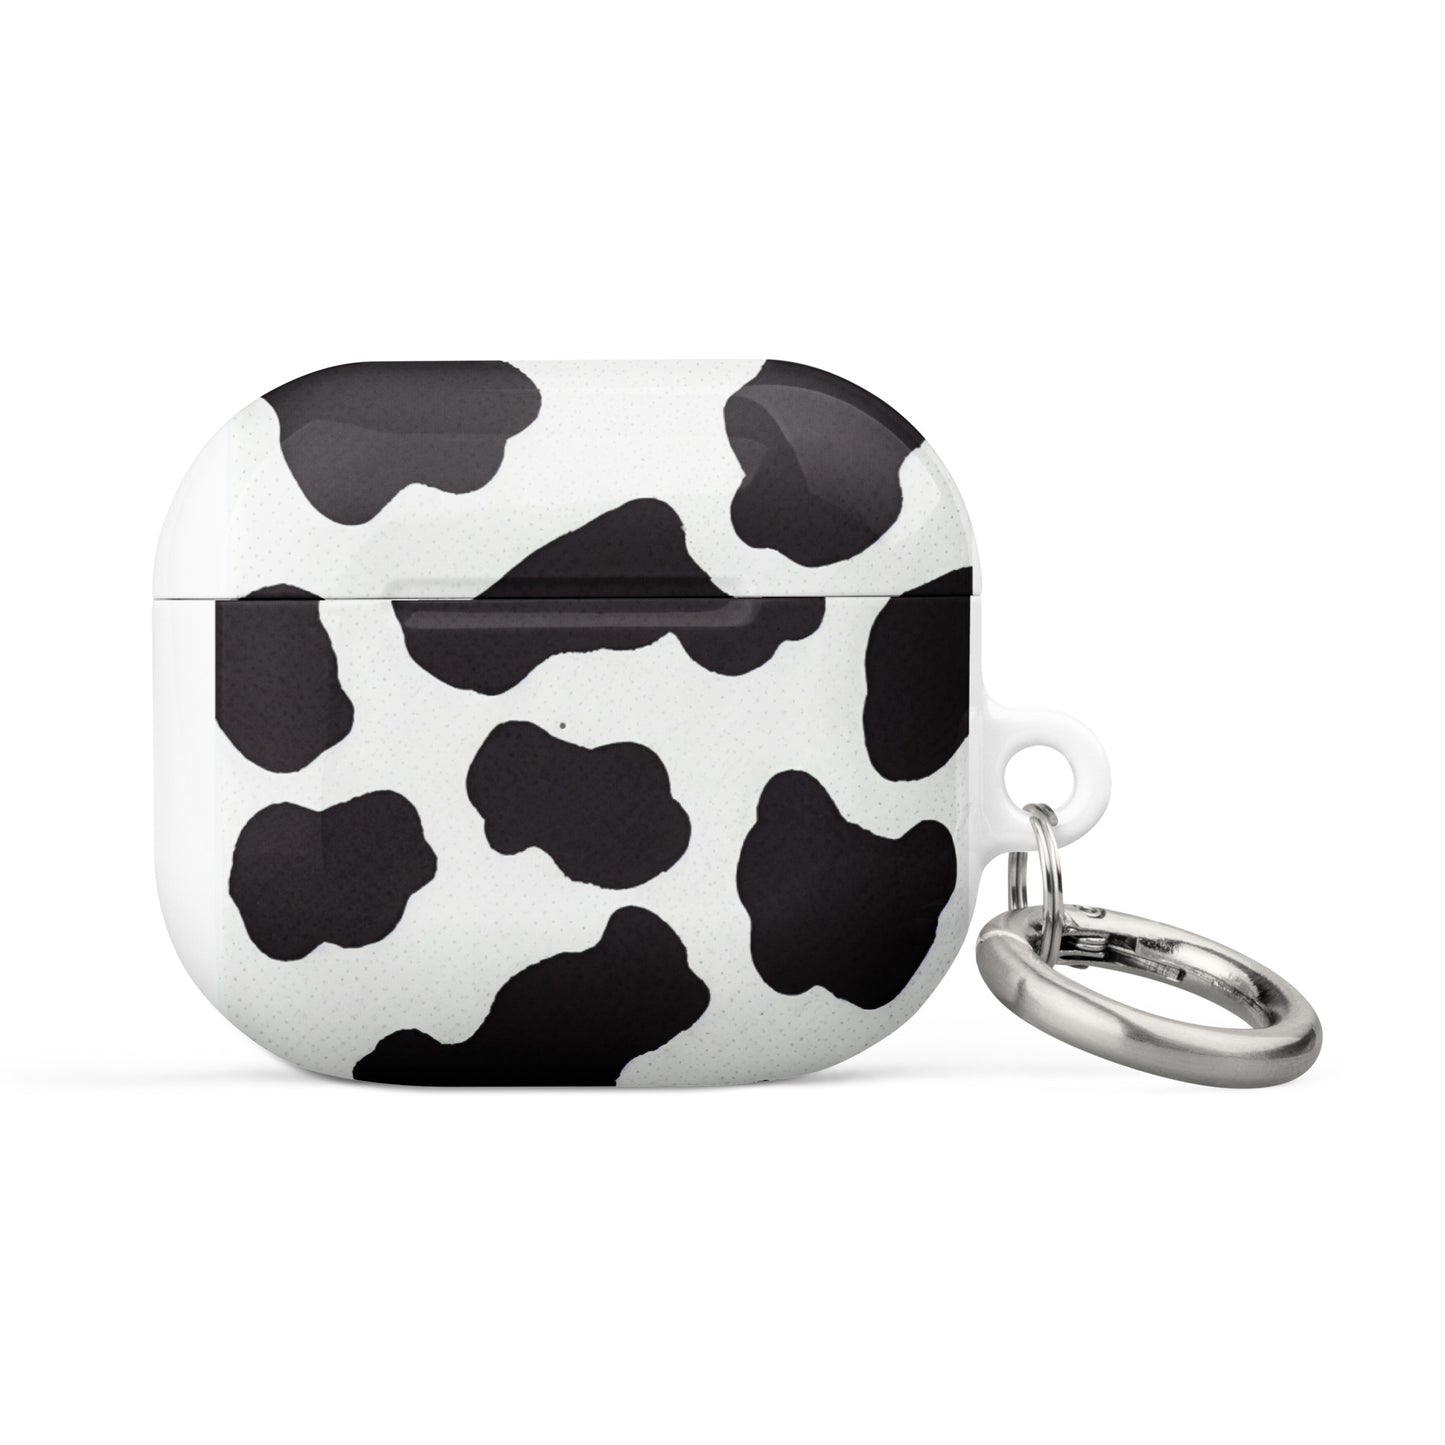 Case for AirPods® - Cow Print